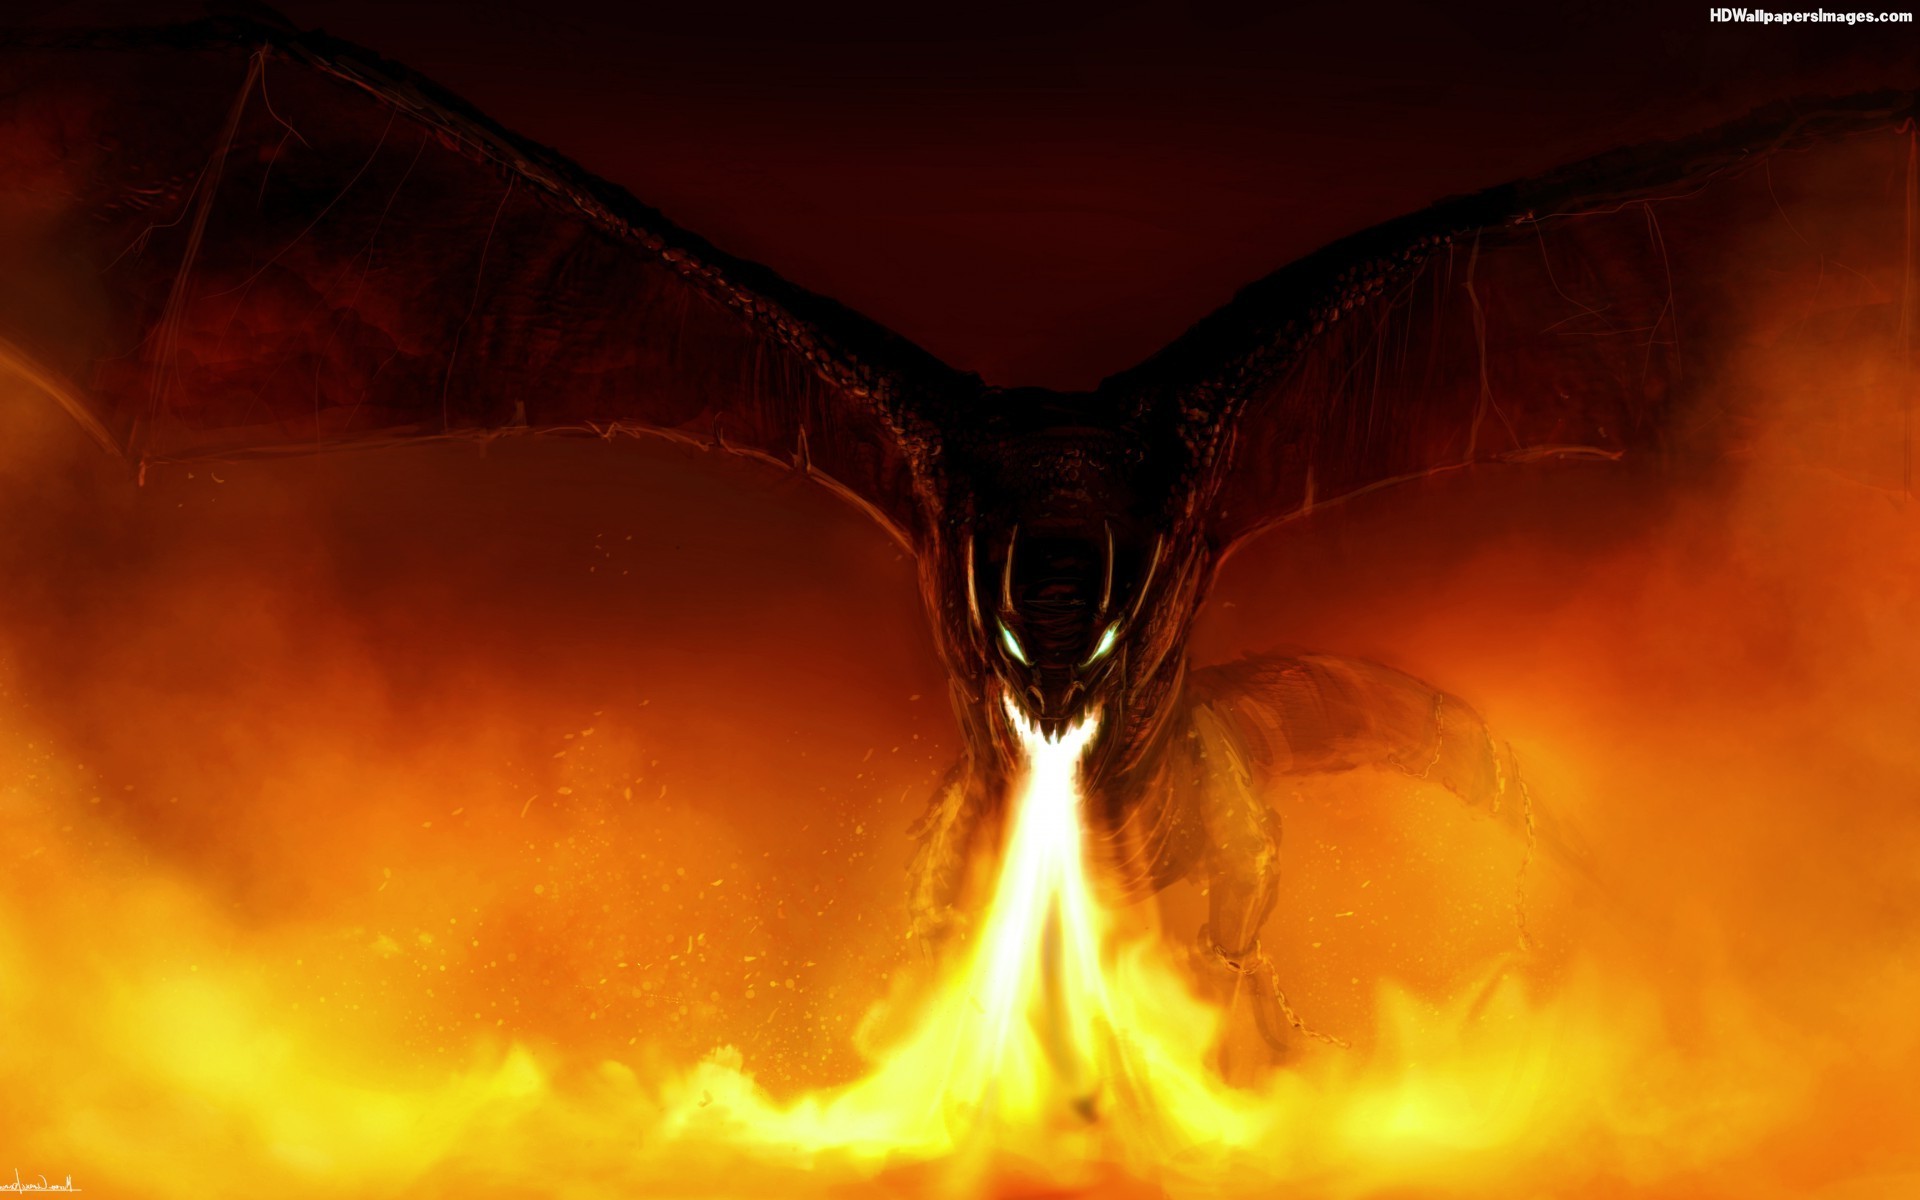 1920x1200 Fire-Breathing Dragon Images | HD Wallpapers Images